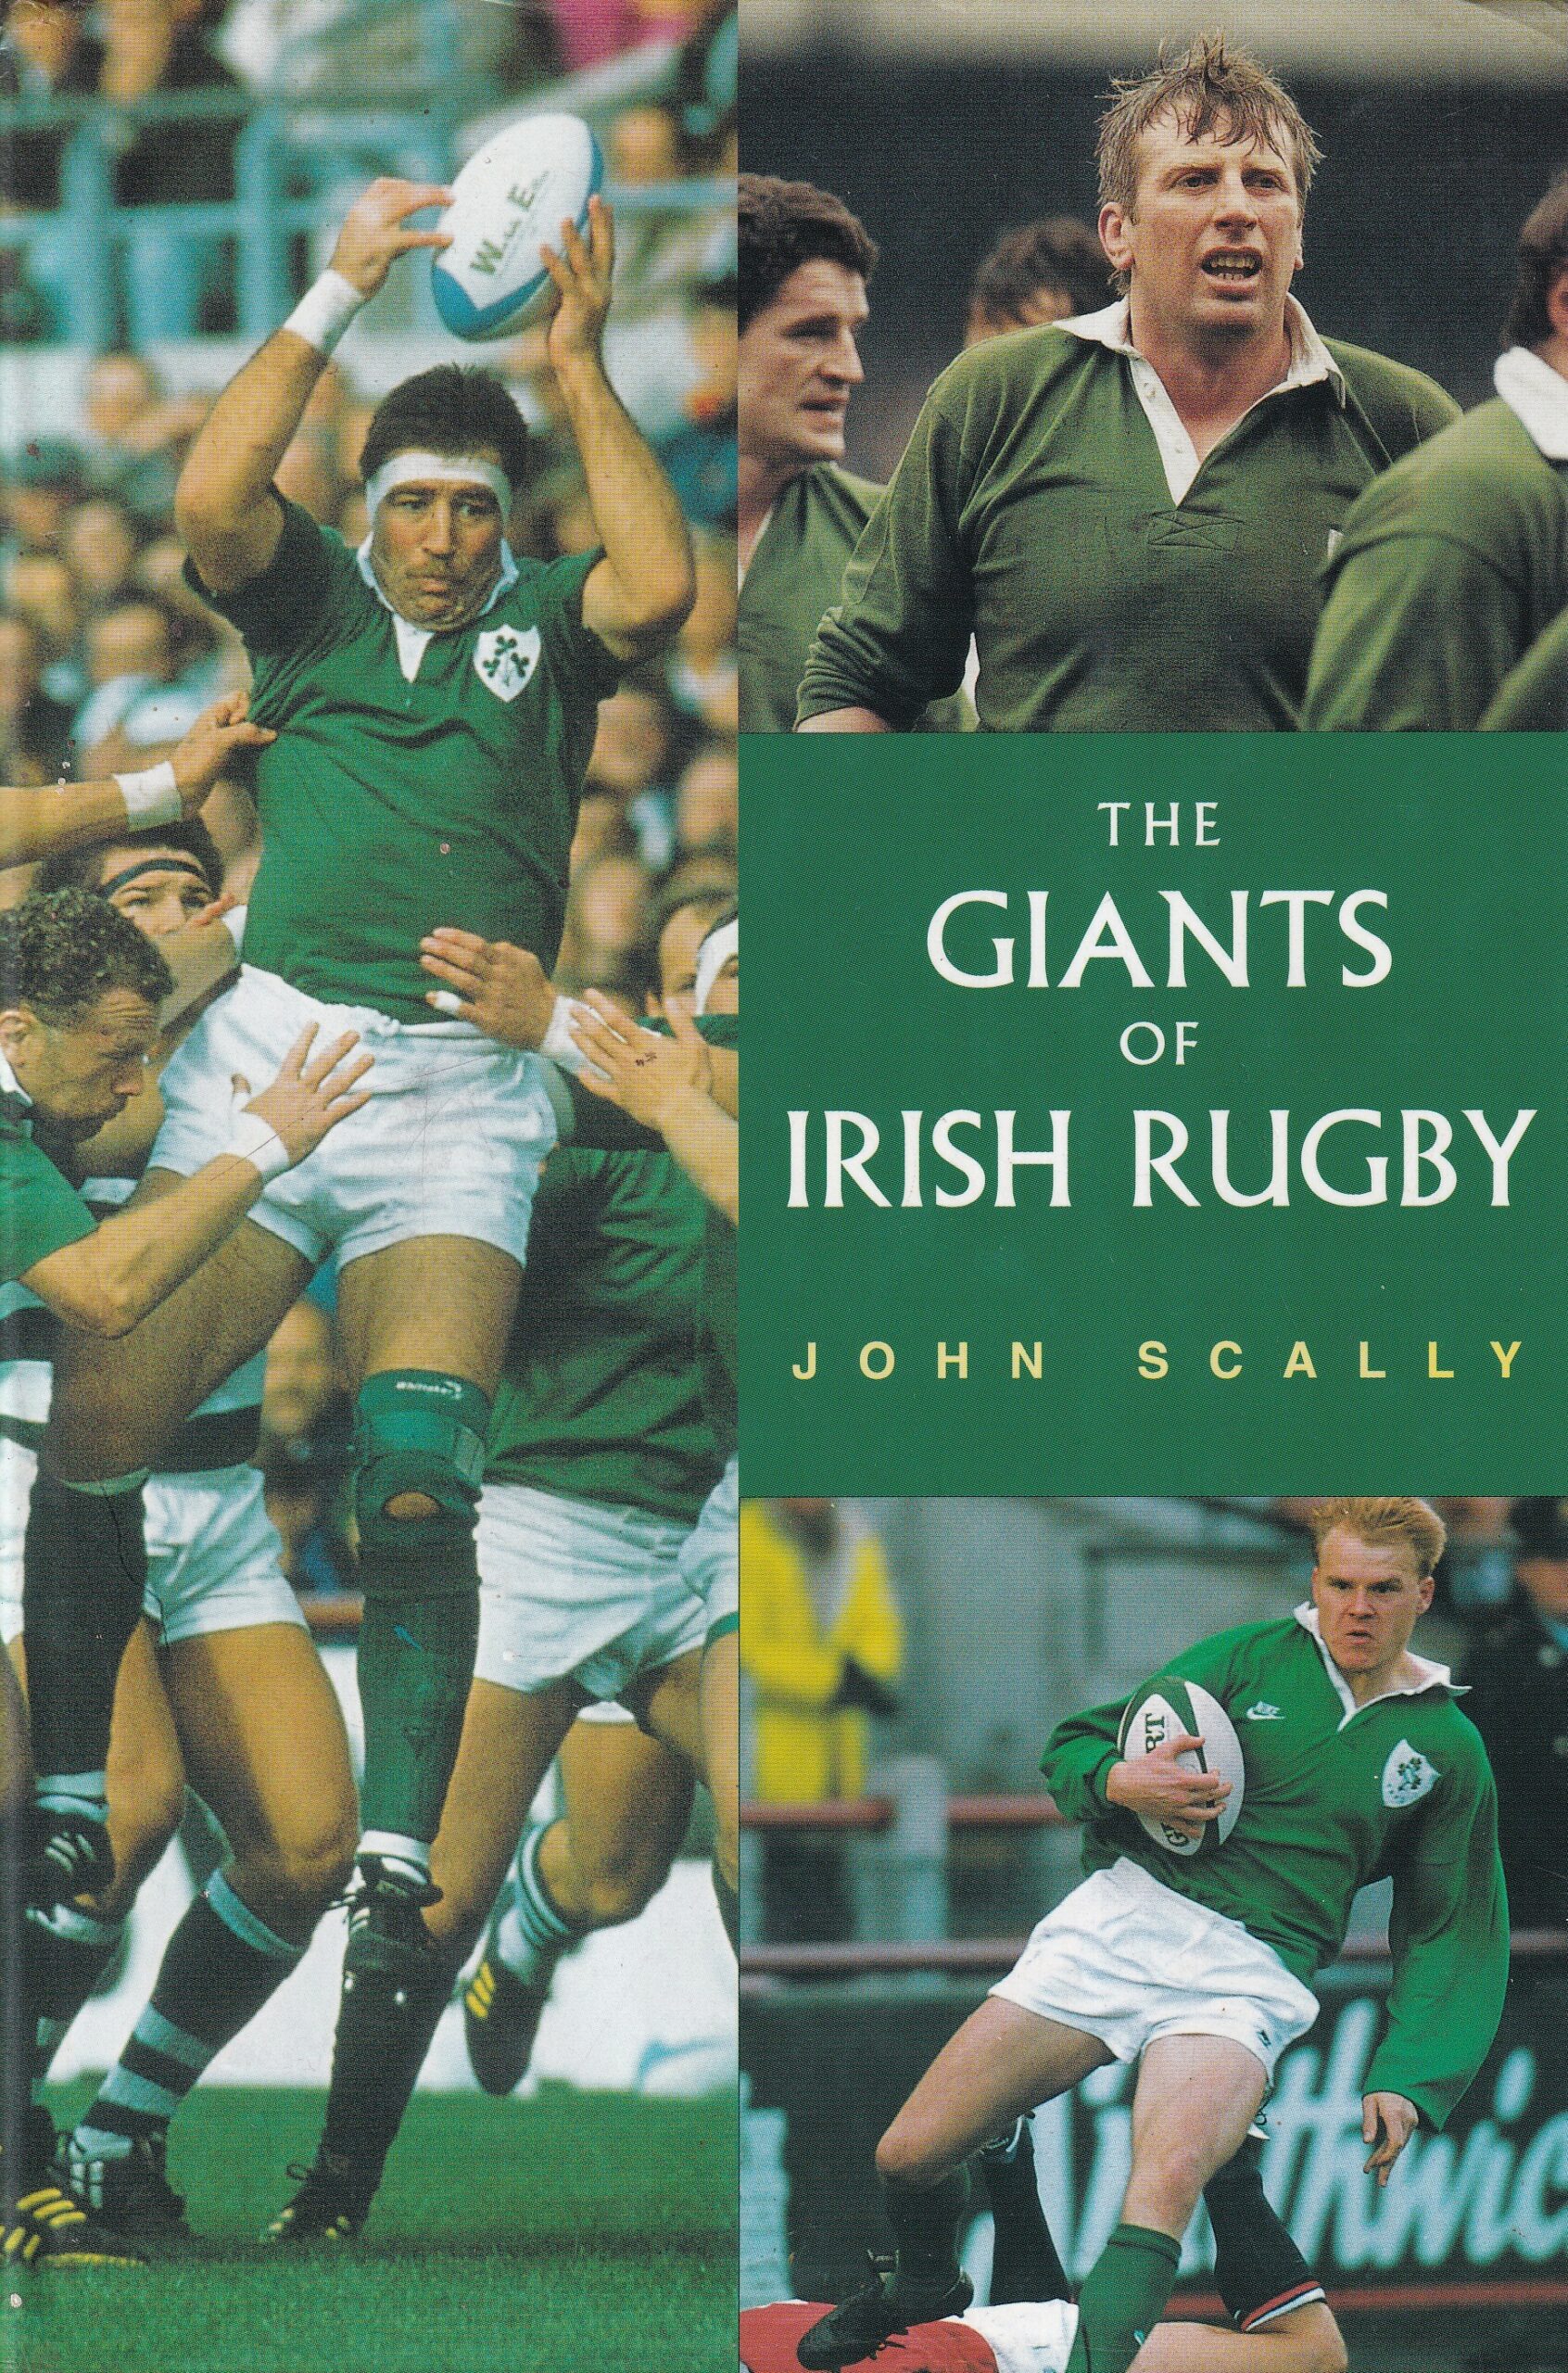 The Giants of Irish Rugby League | John Scally | Charlie Byrne's